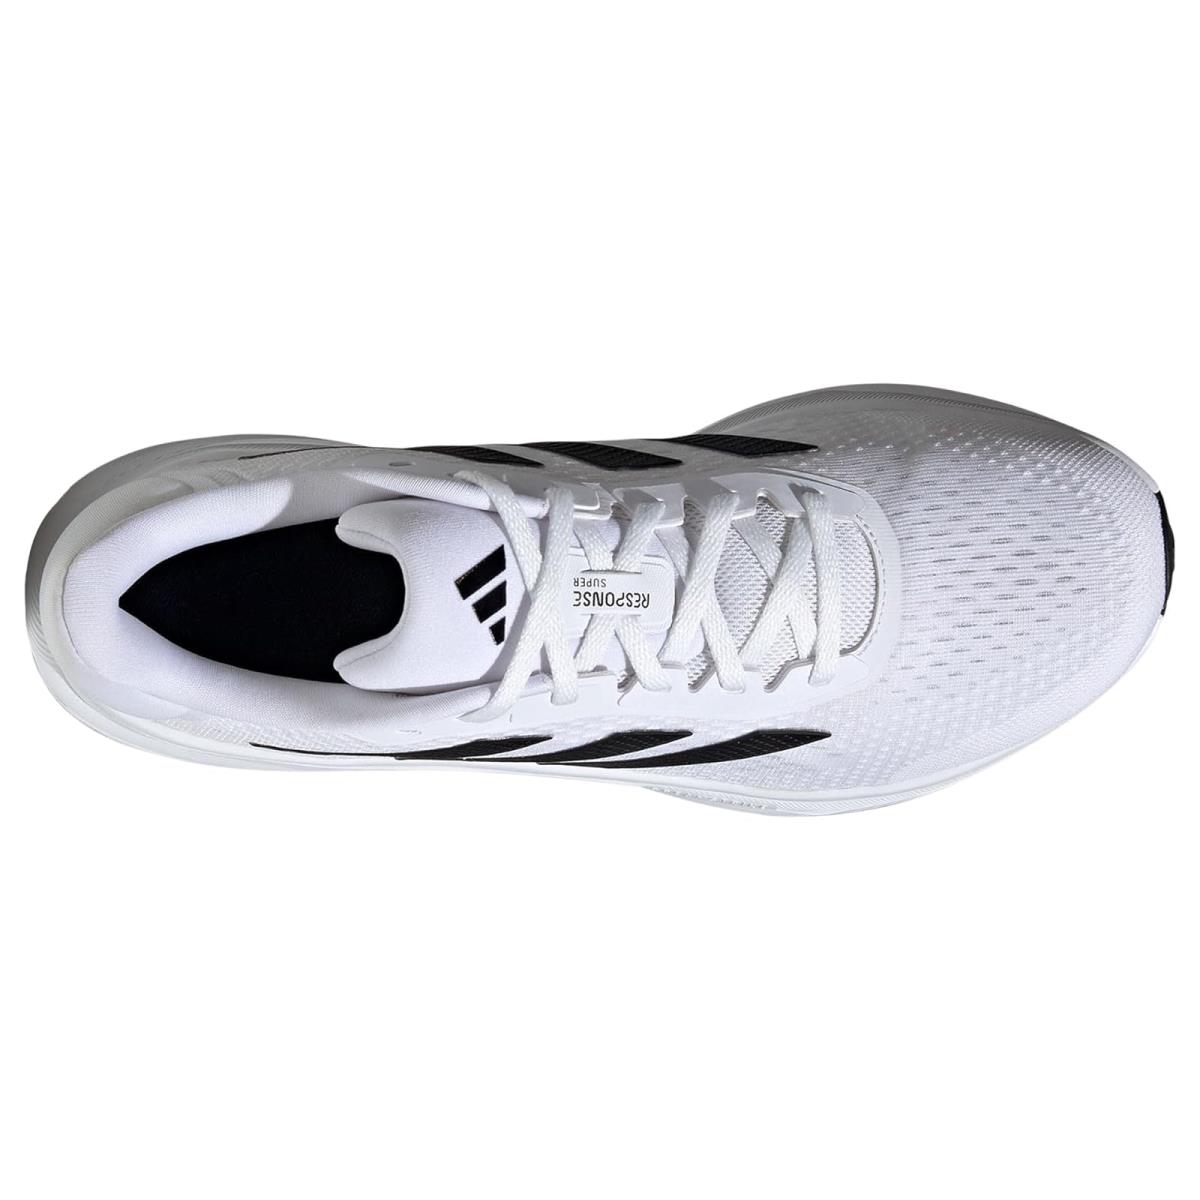 Man`s Sneakers Athletic Shoes Adidas Running Response Super - White/Black/Halo Silver